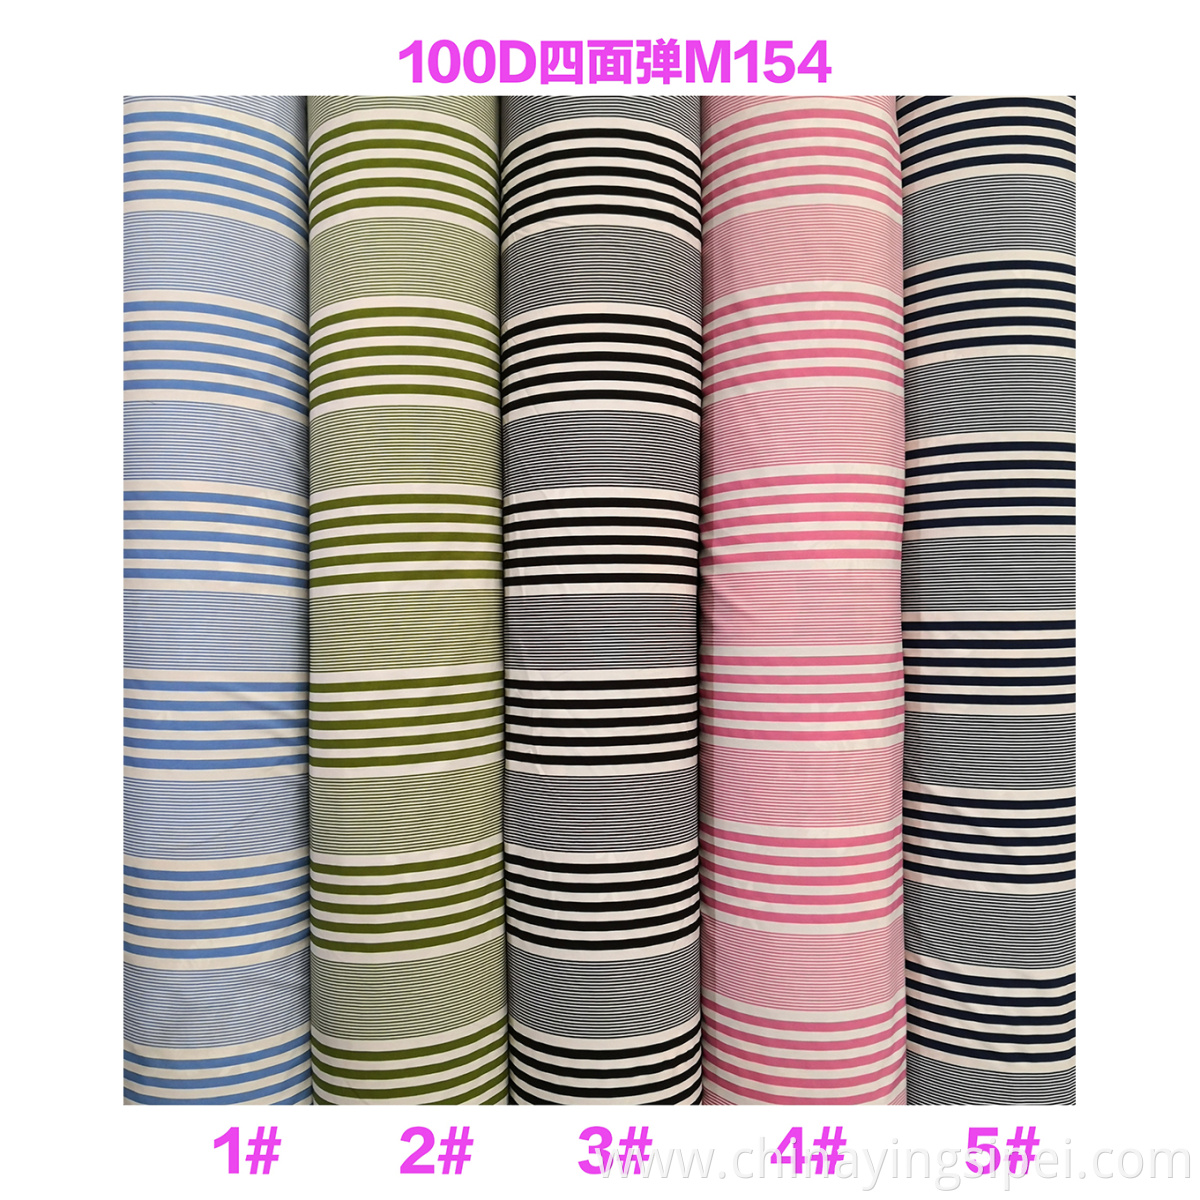 Custom 4-Way Stretch woven Printed Mesh Fabric 97%Polyester 3%Spandex Breathable Fabric For Dress